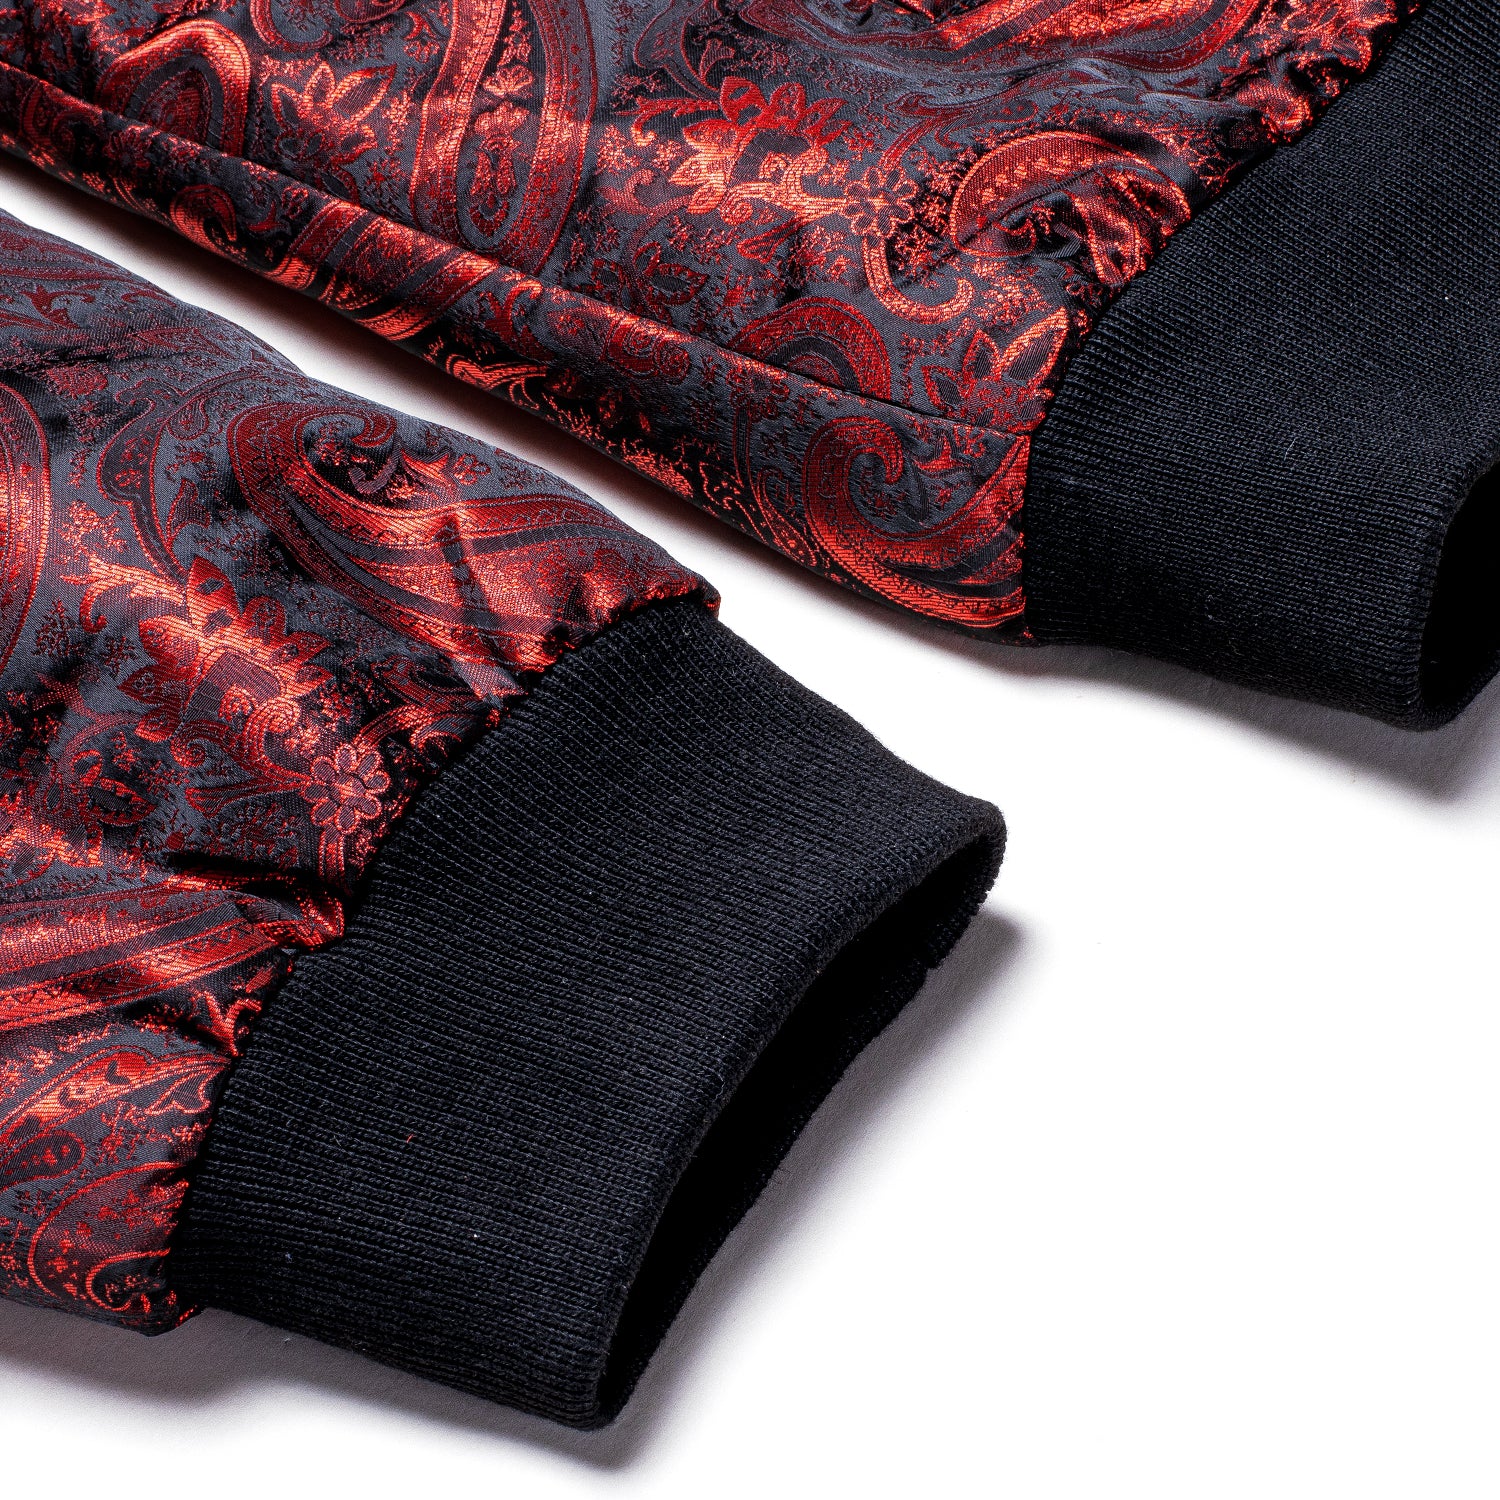 cuff of red paisley jacket